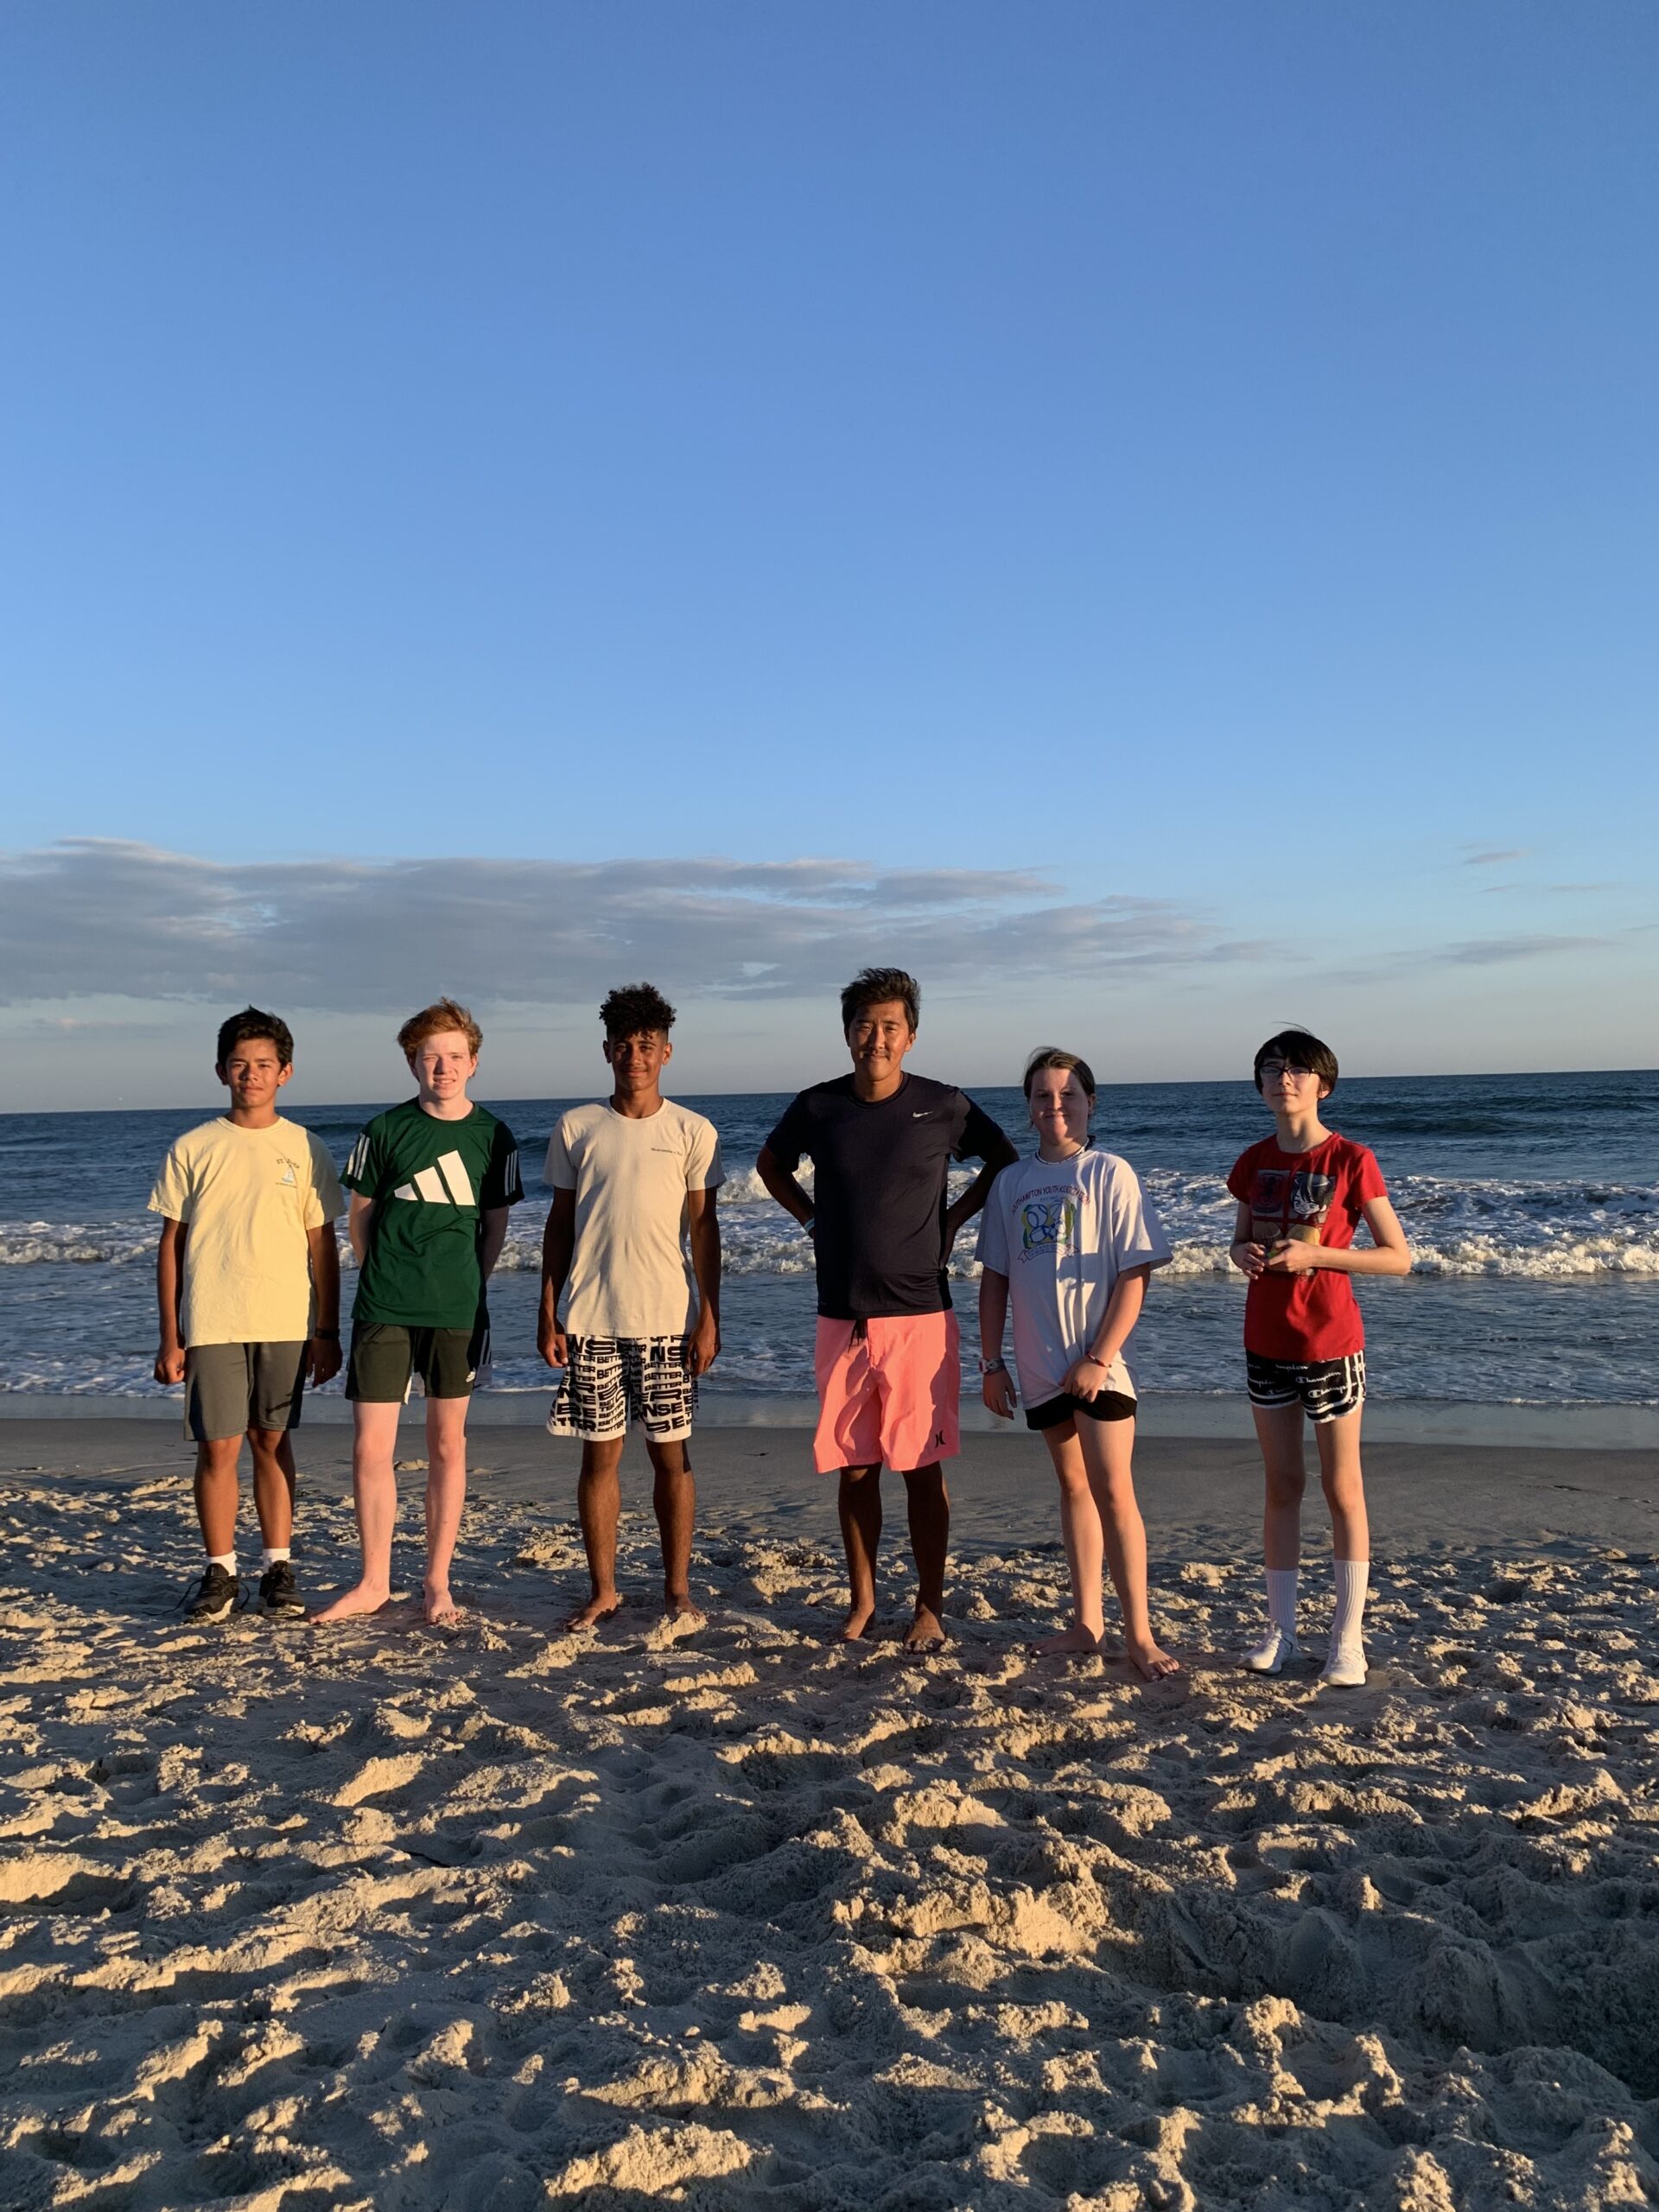 The Our Lady of the Hamptons School cross country team is well into training for the new season, getting in early practices, sometimes at the beach. COURTESY OUR LADY OF THE HAMPTONS